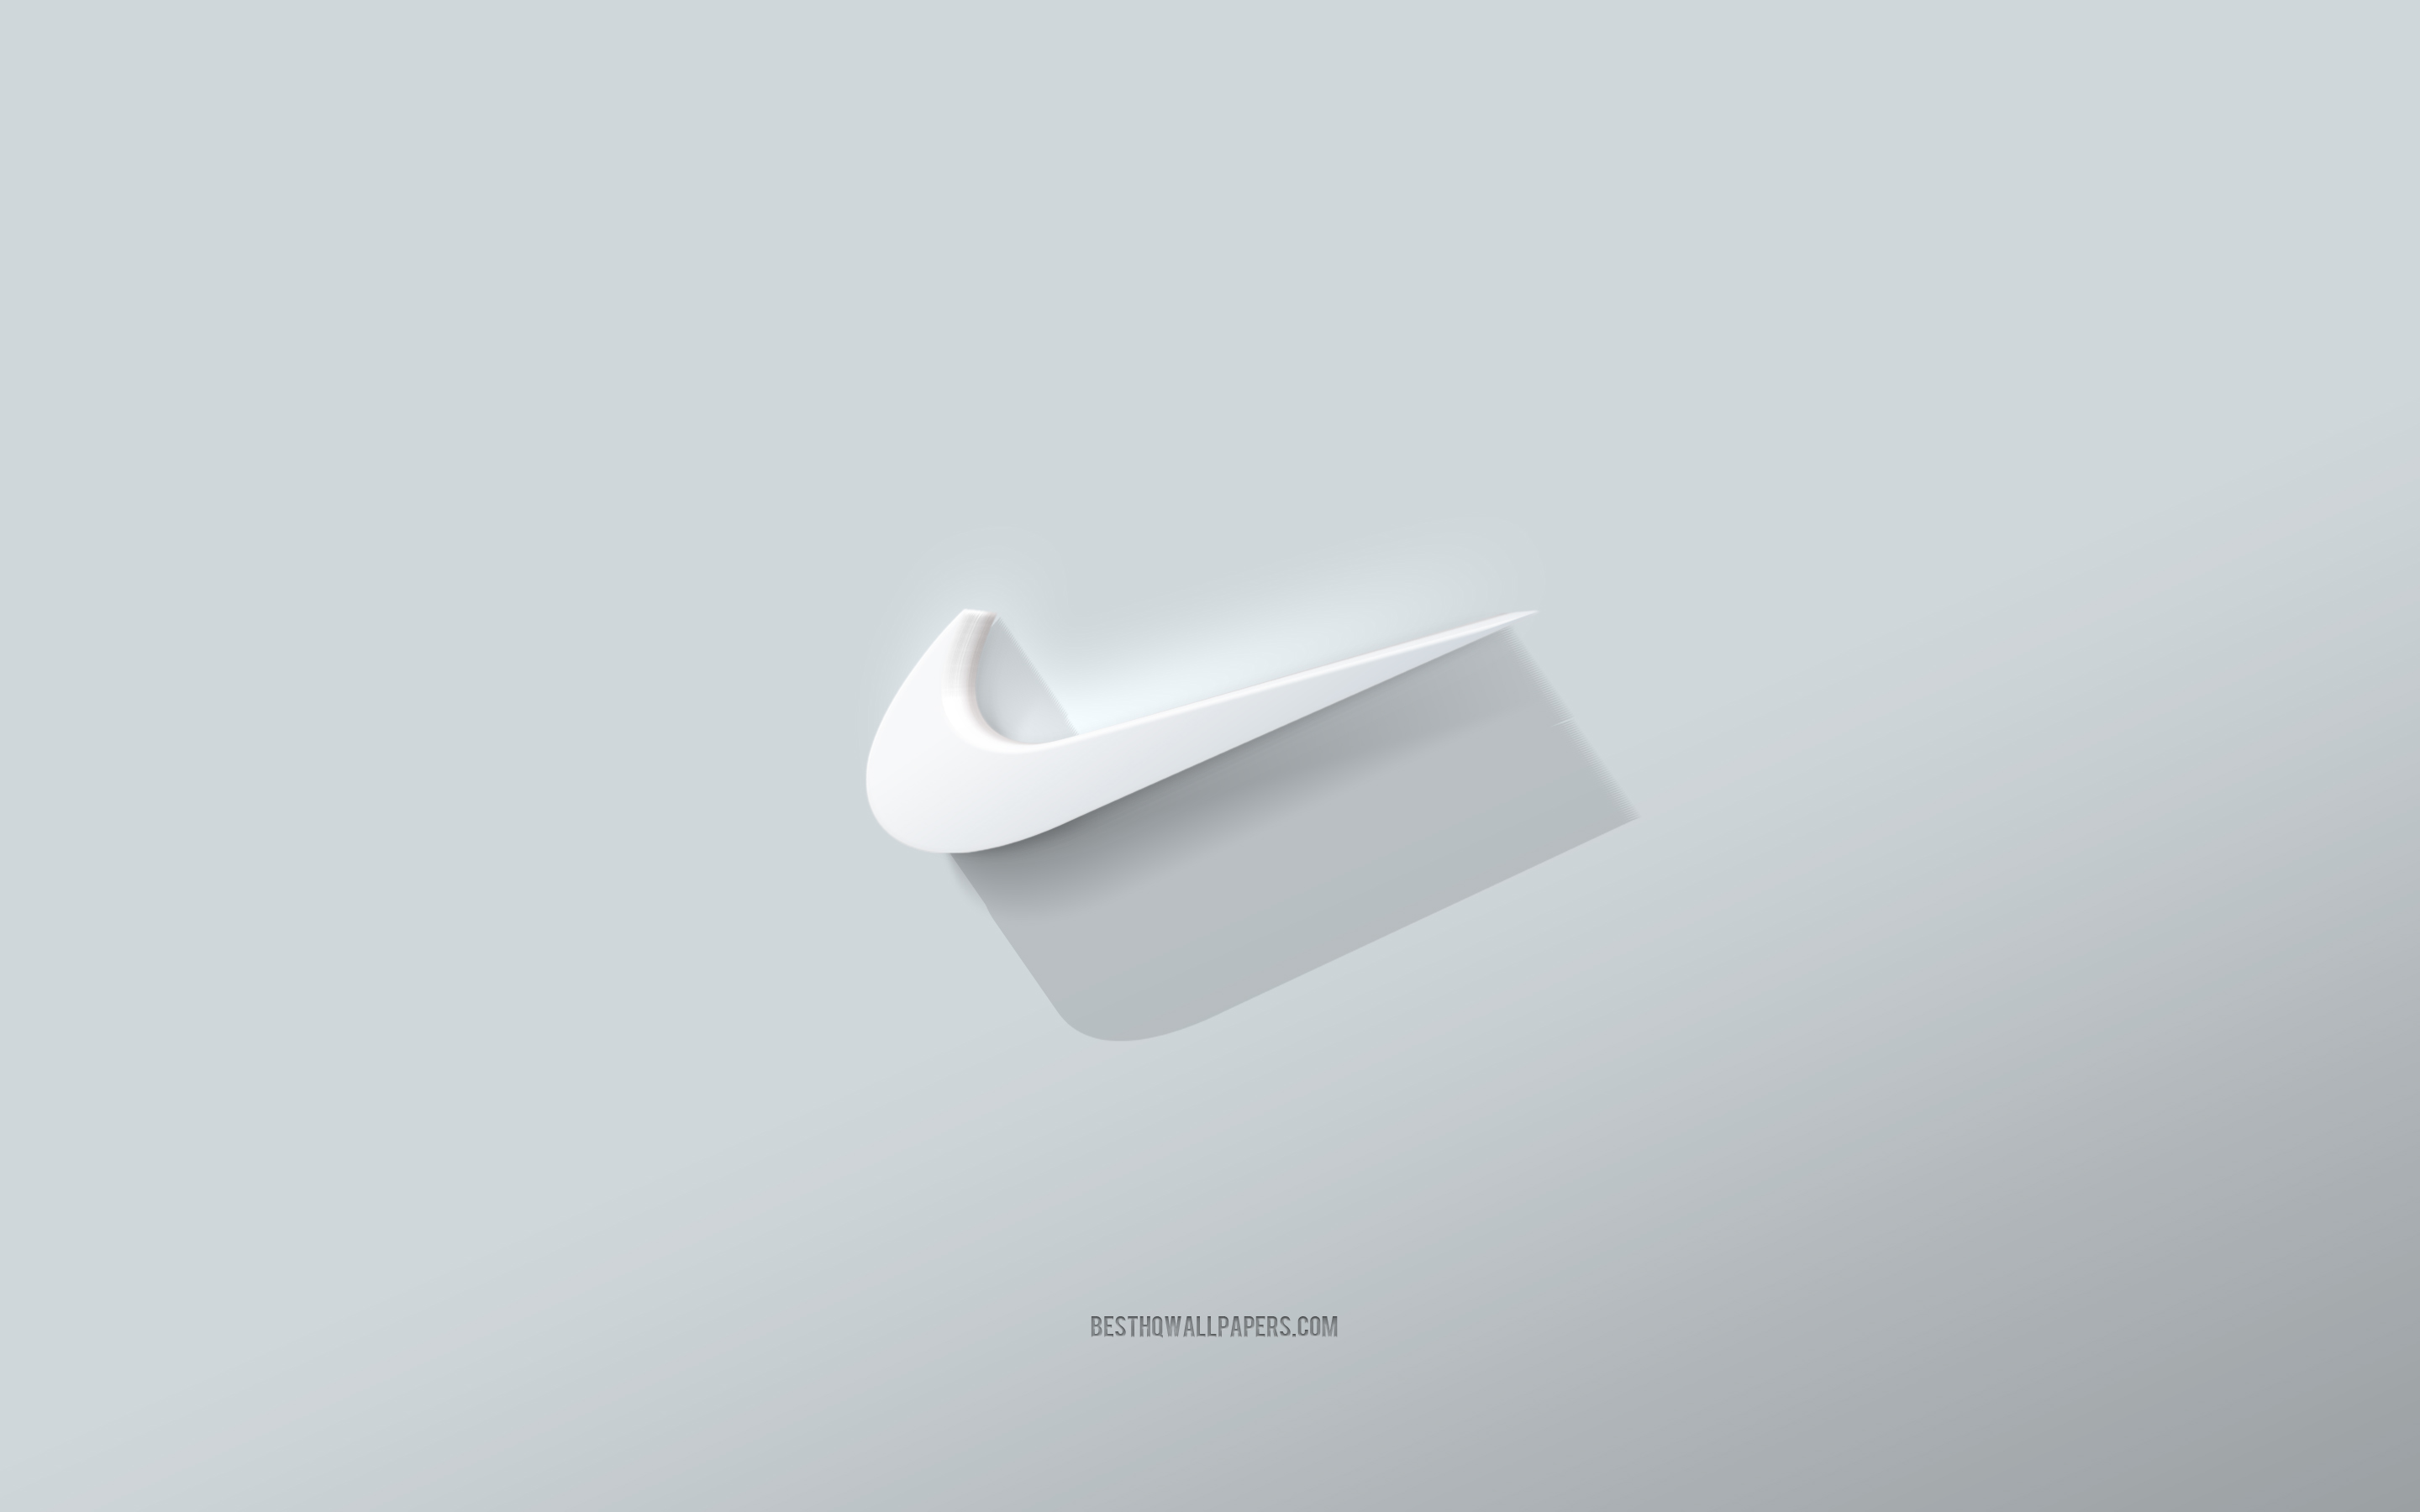 Download wallpapers Nike logo, white background, Nike logo, 3d art, Nike, 3d Nike emblem for desktop with 1024x1024. High Quality HD pictures wallpapers